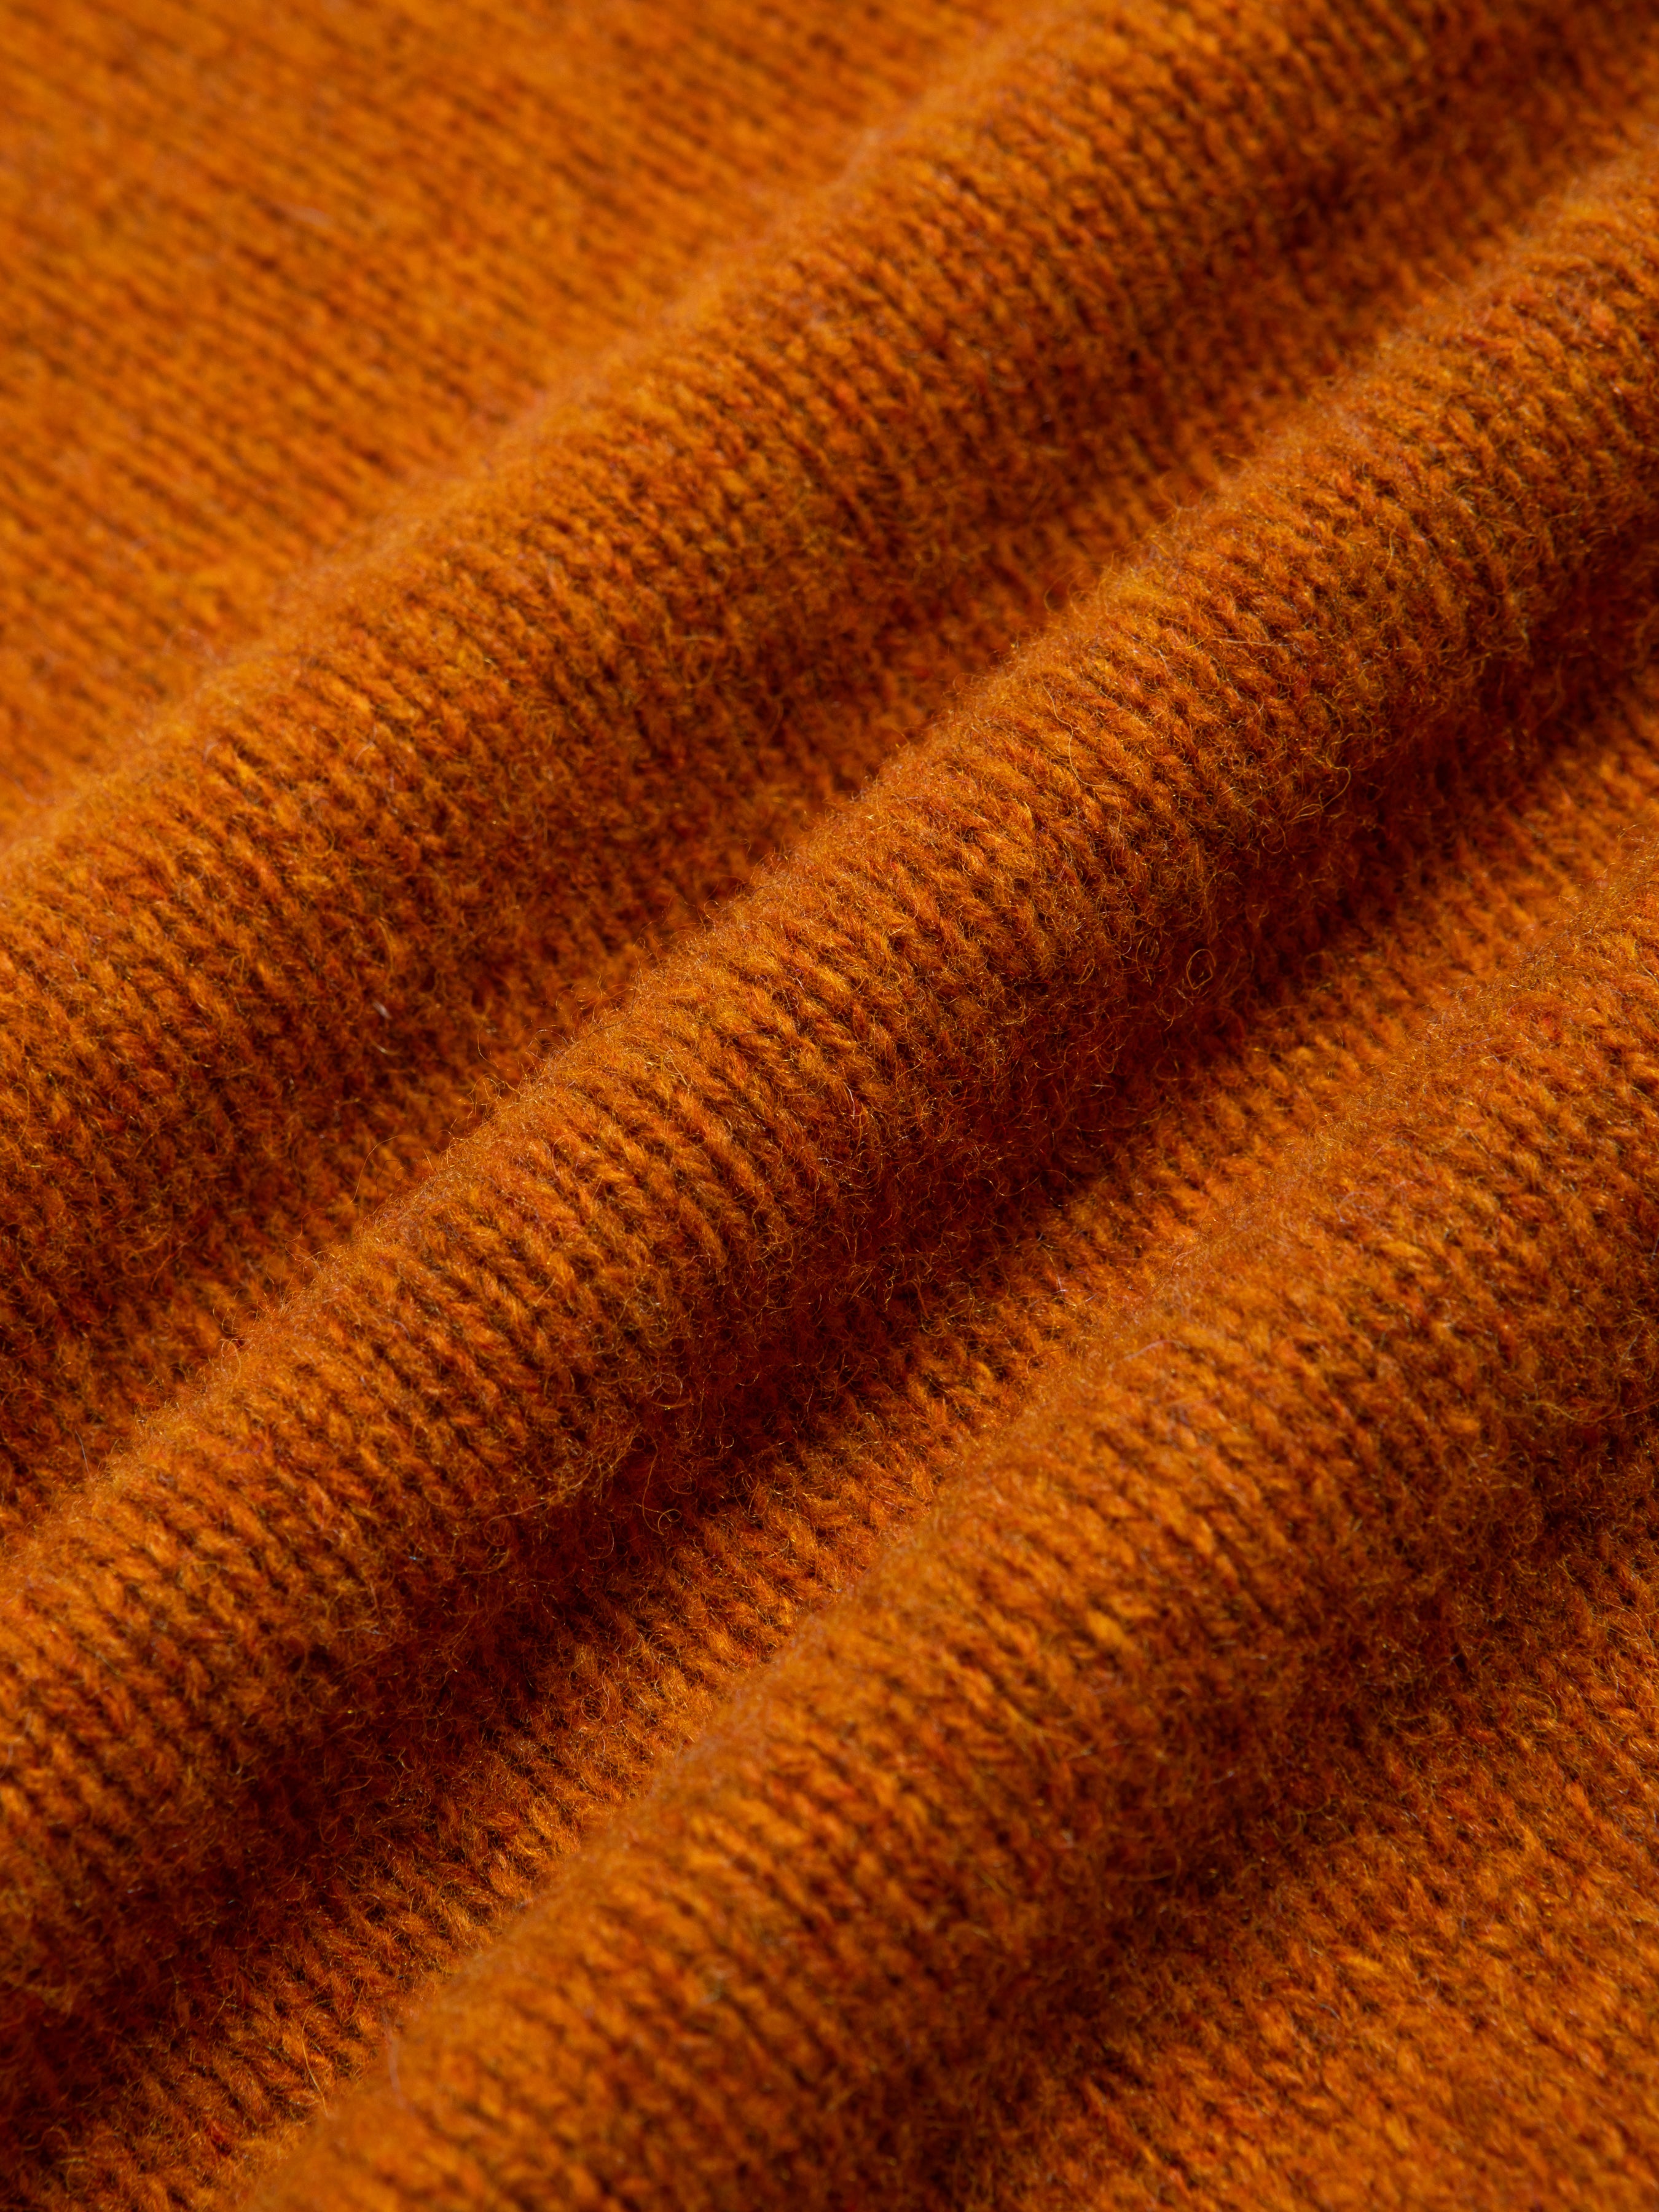 A brushed shetland wool material in a bright orange colour.